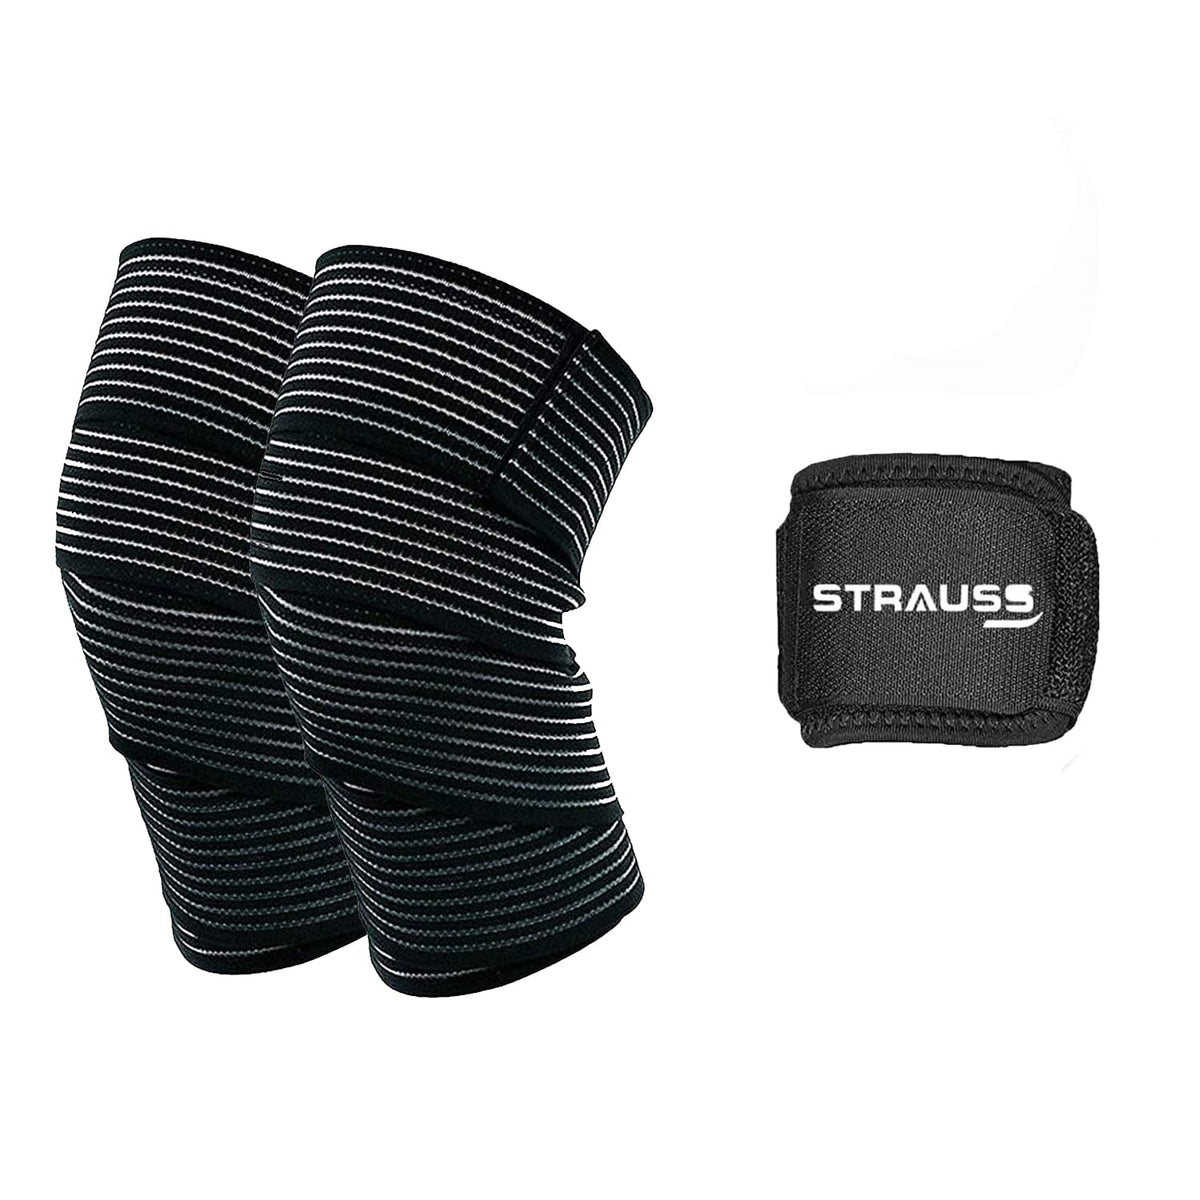 Strauss Wrist Support, Single (Free Size, Black) with Knee Compression